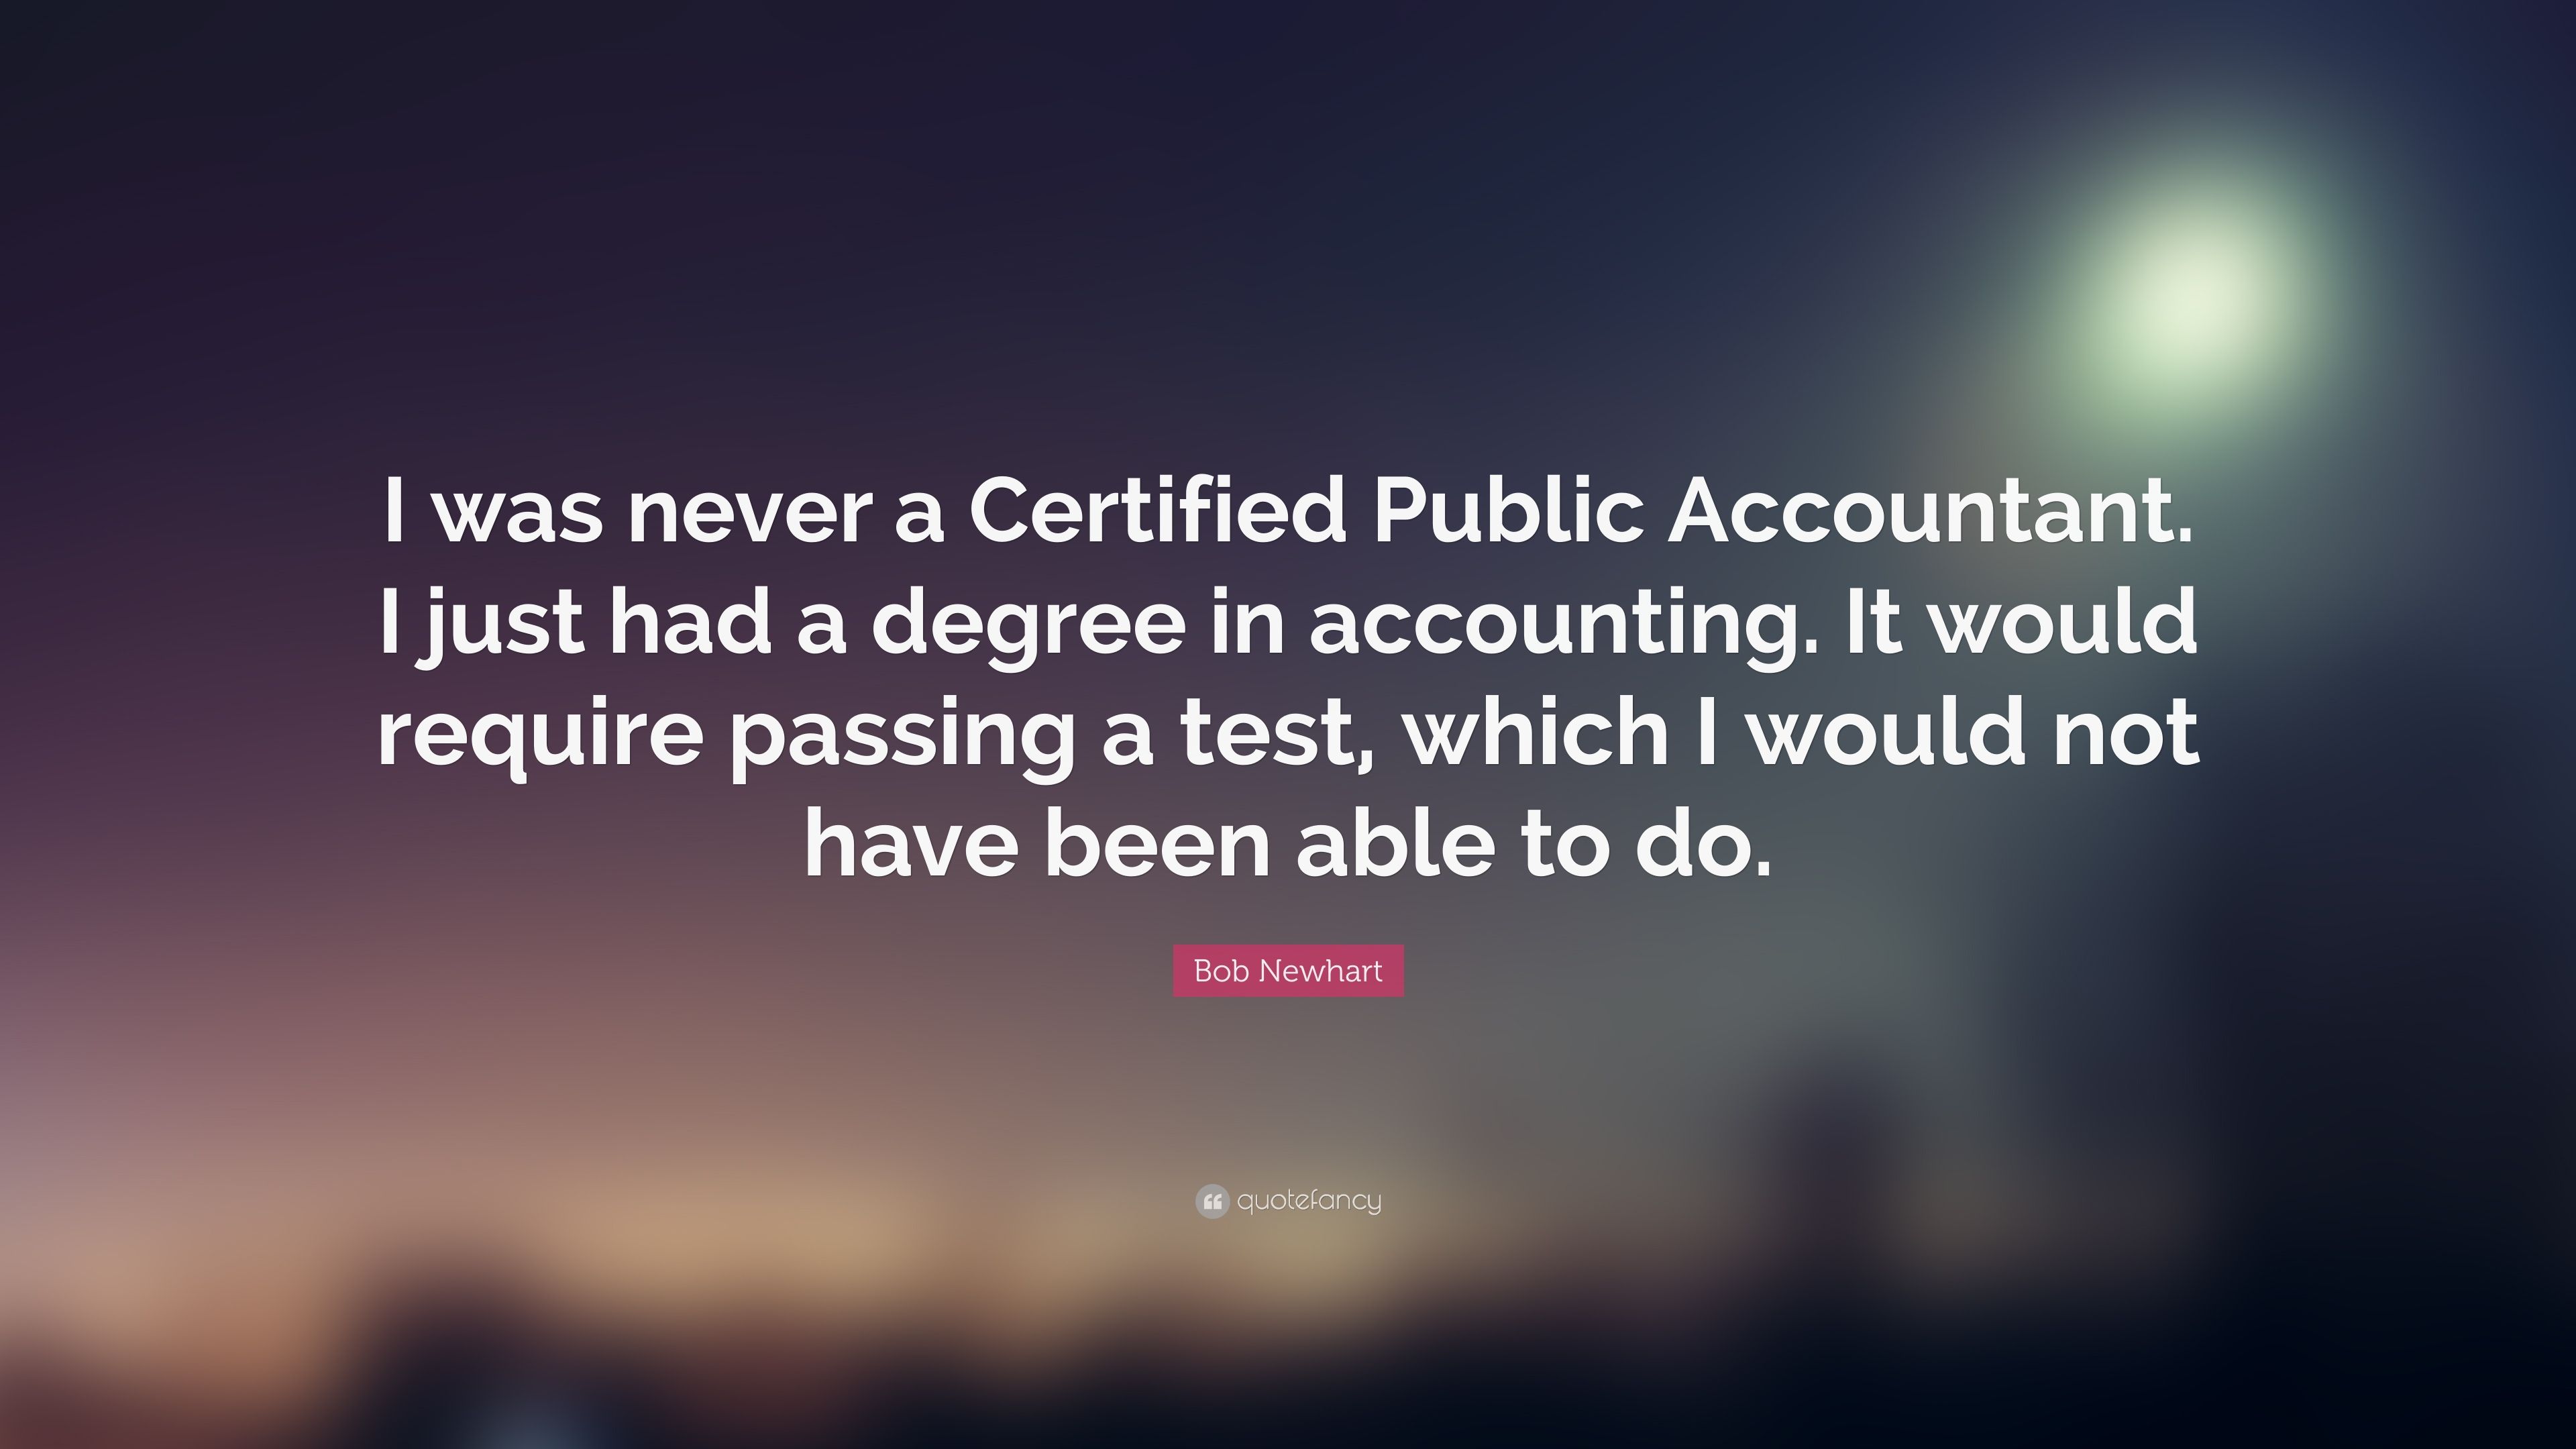 Bob Newhart Quote: “I was never a Certified Public Accountant. I